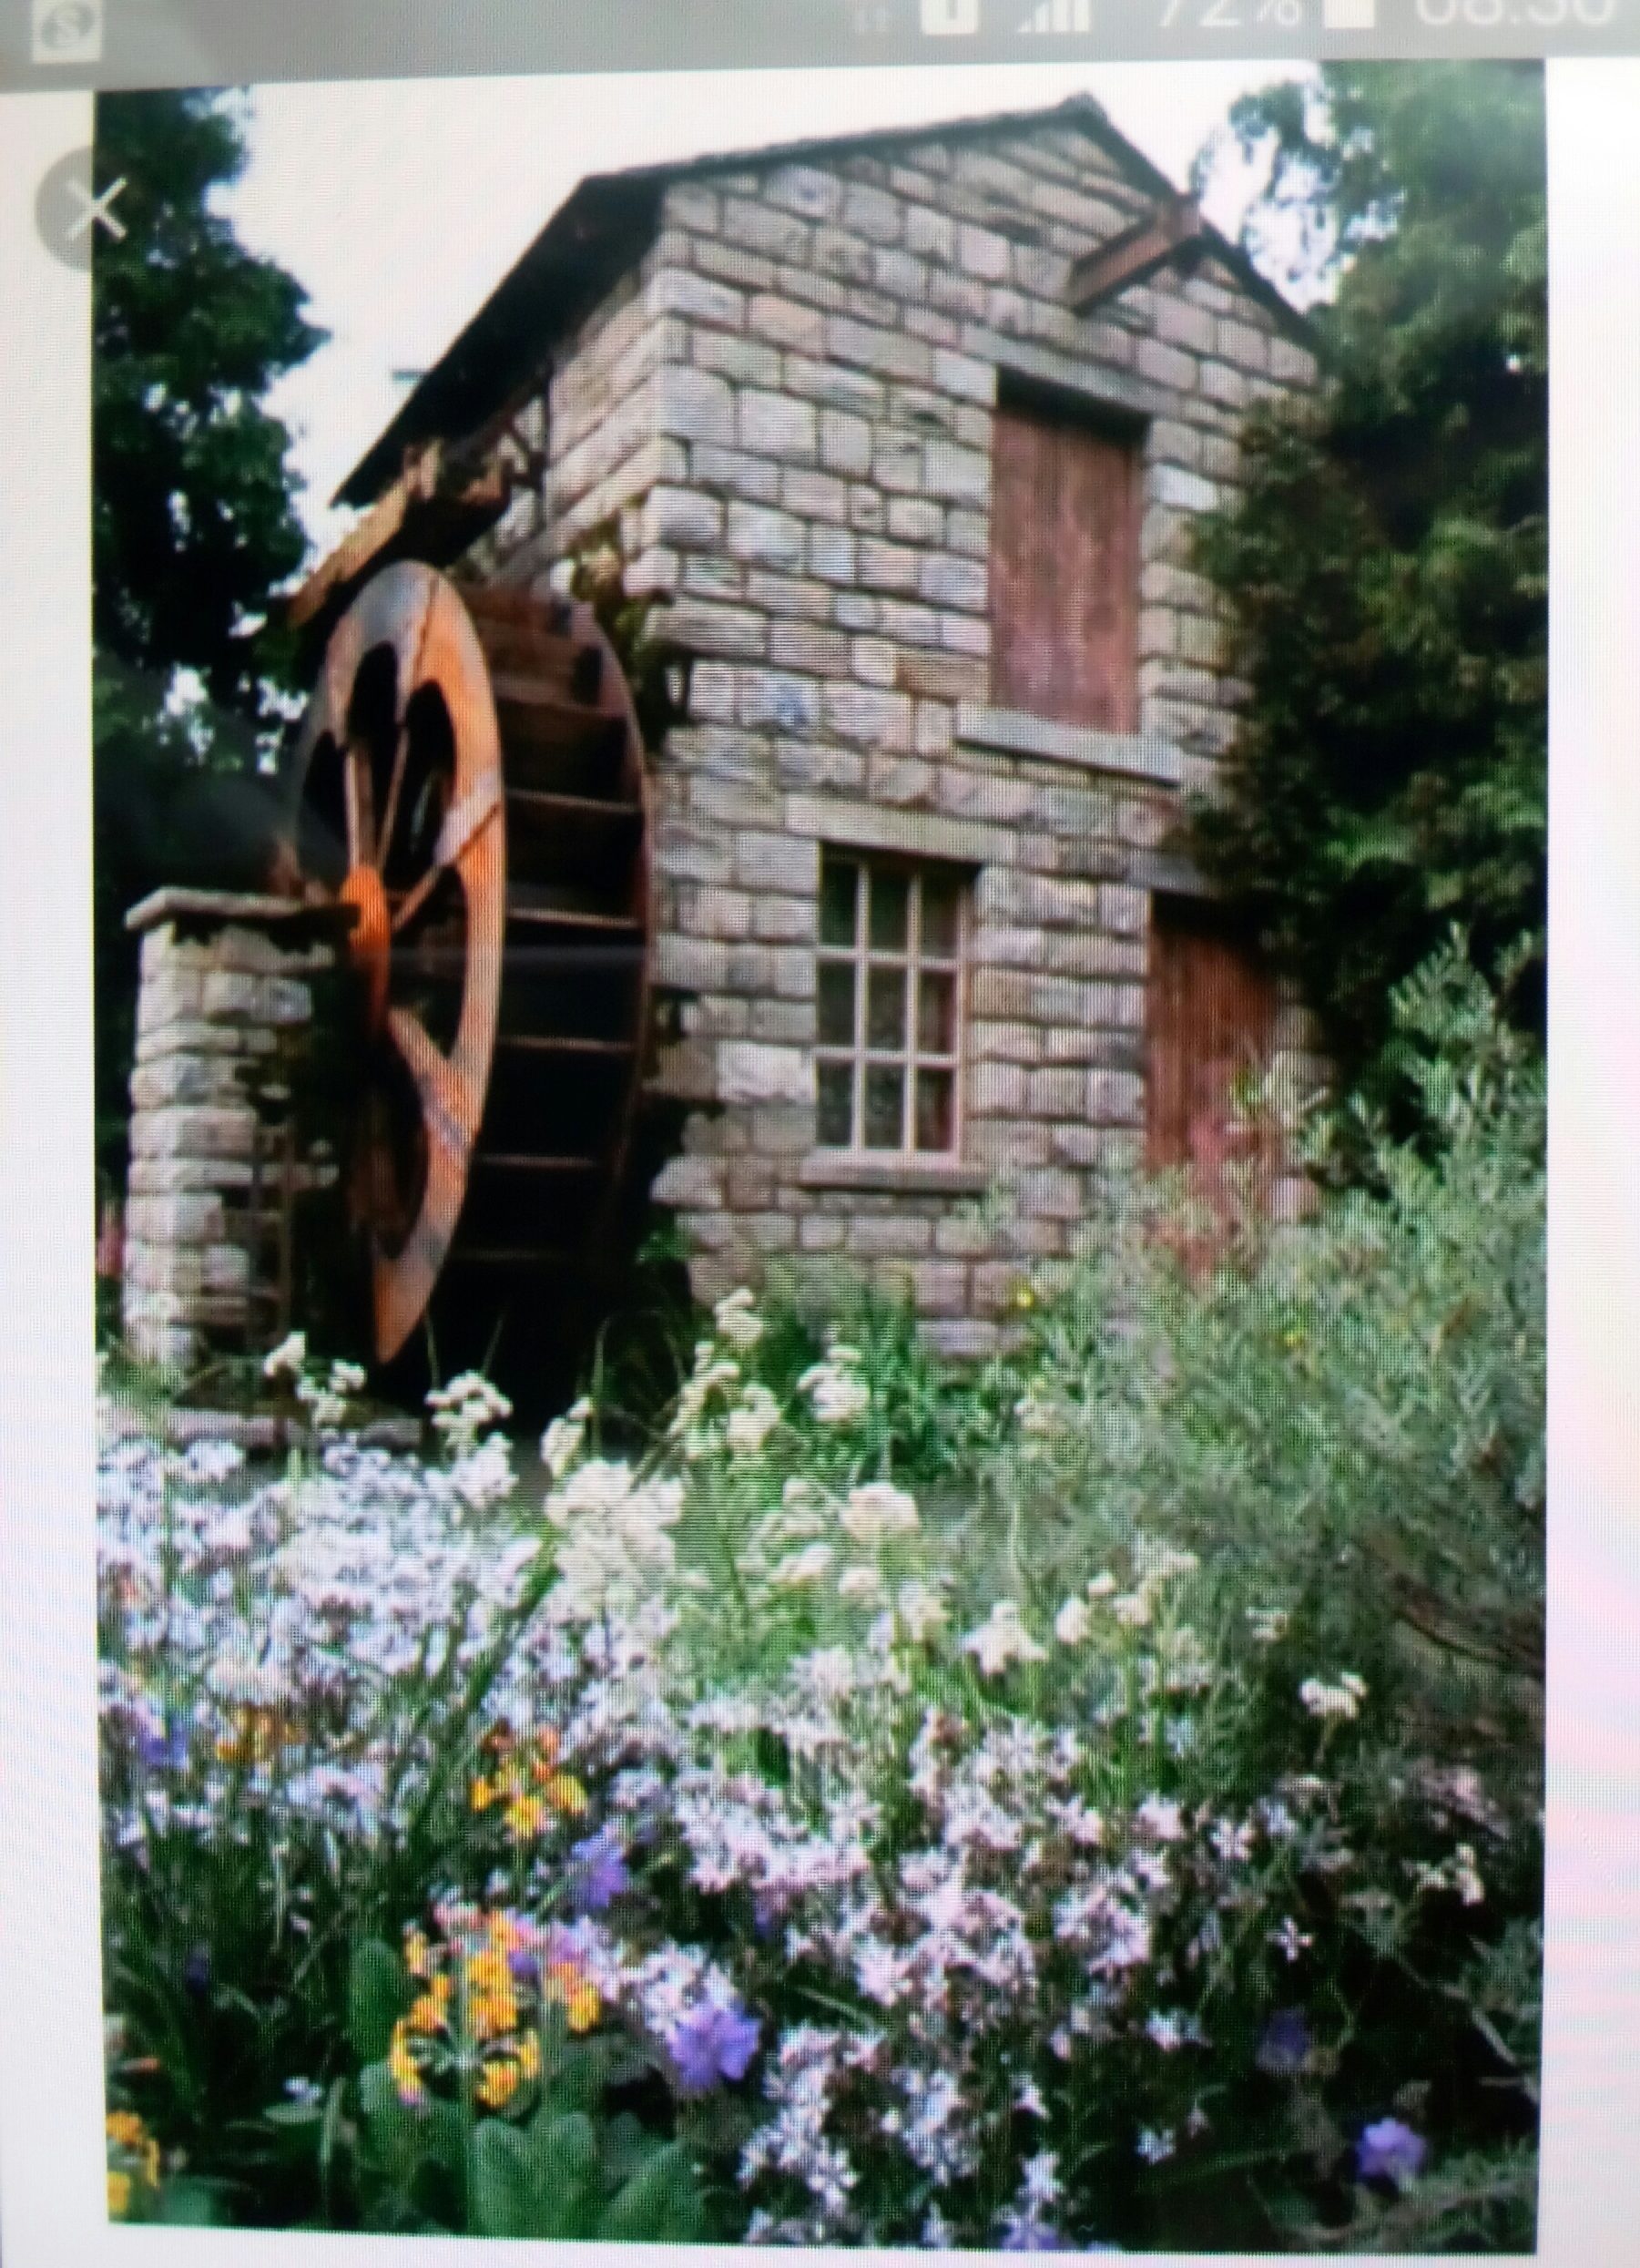 This is our involvement with the Chelsea flower show.and construction of a millpond water wheel..award winning..2012